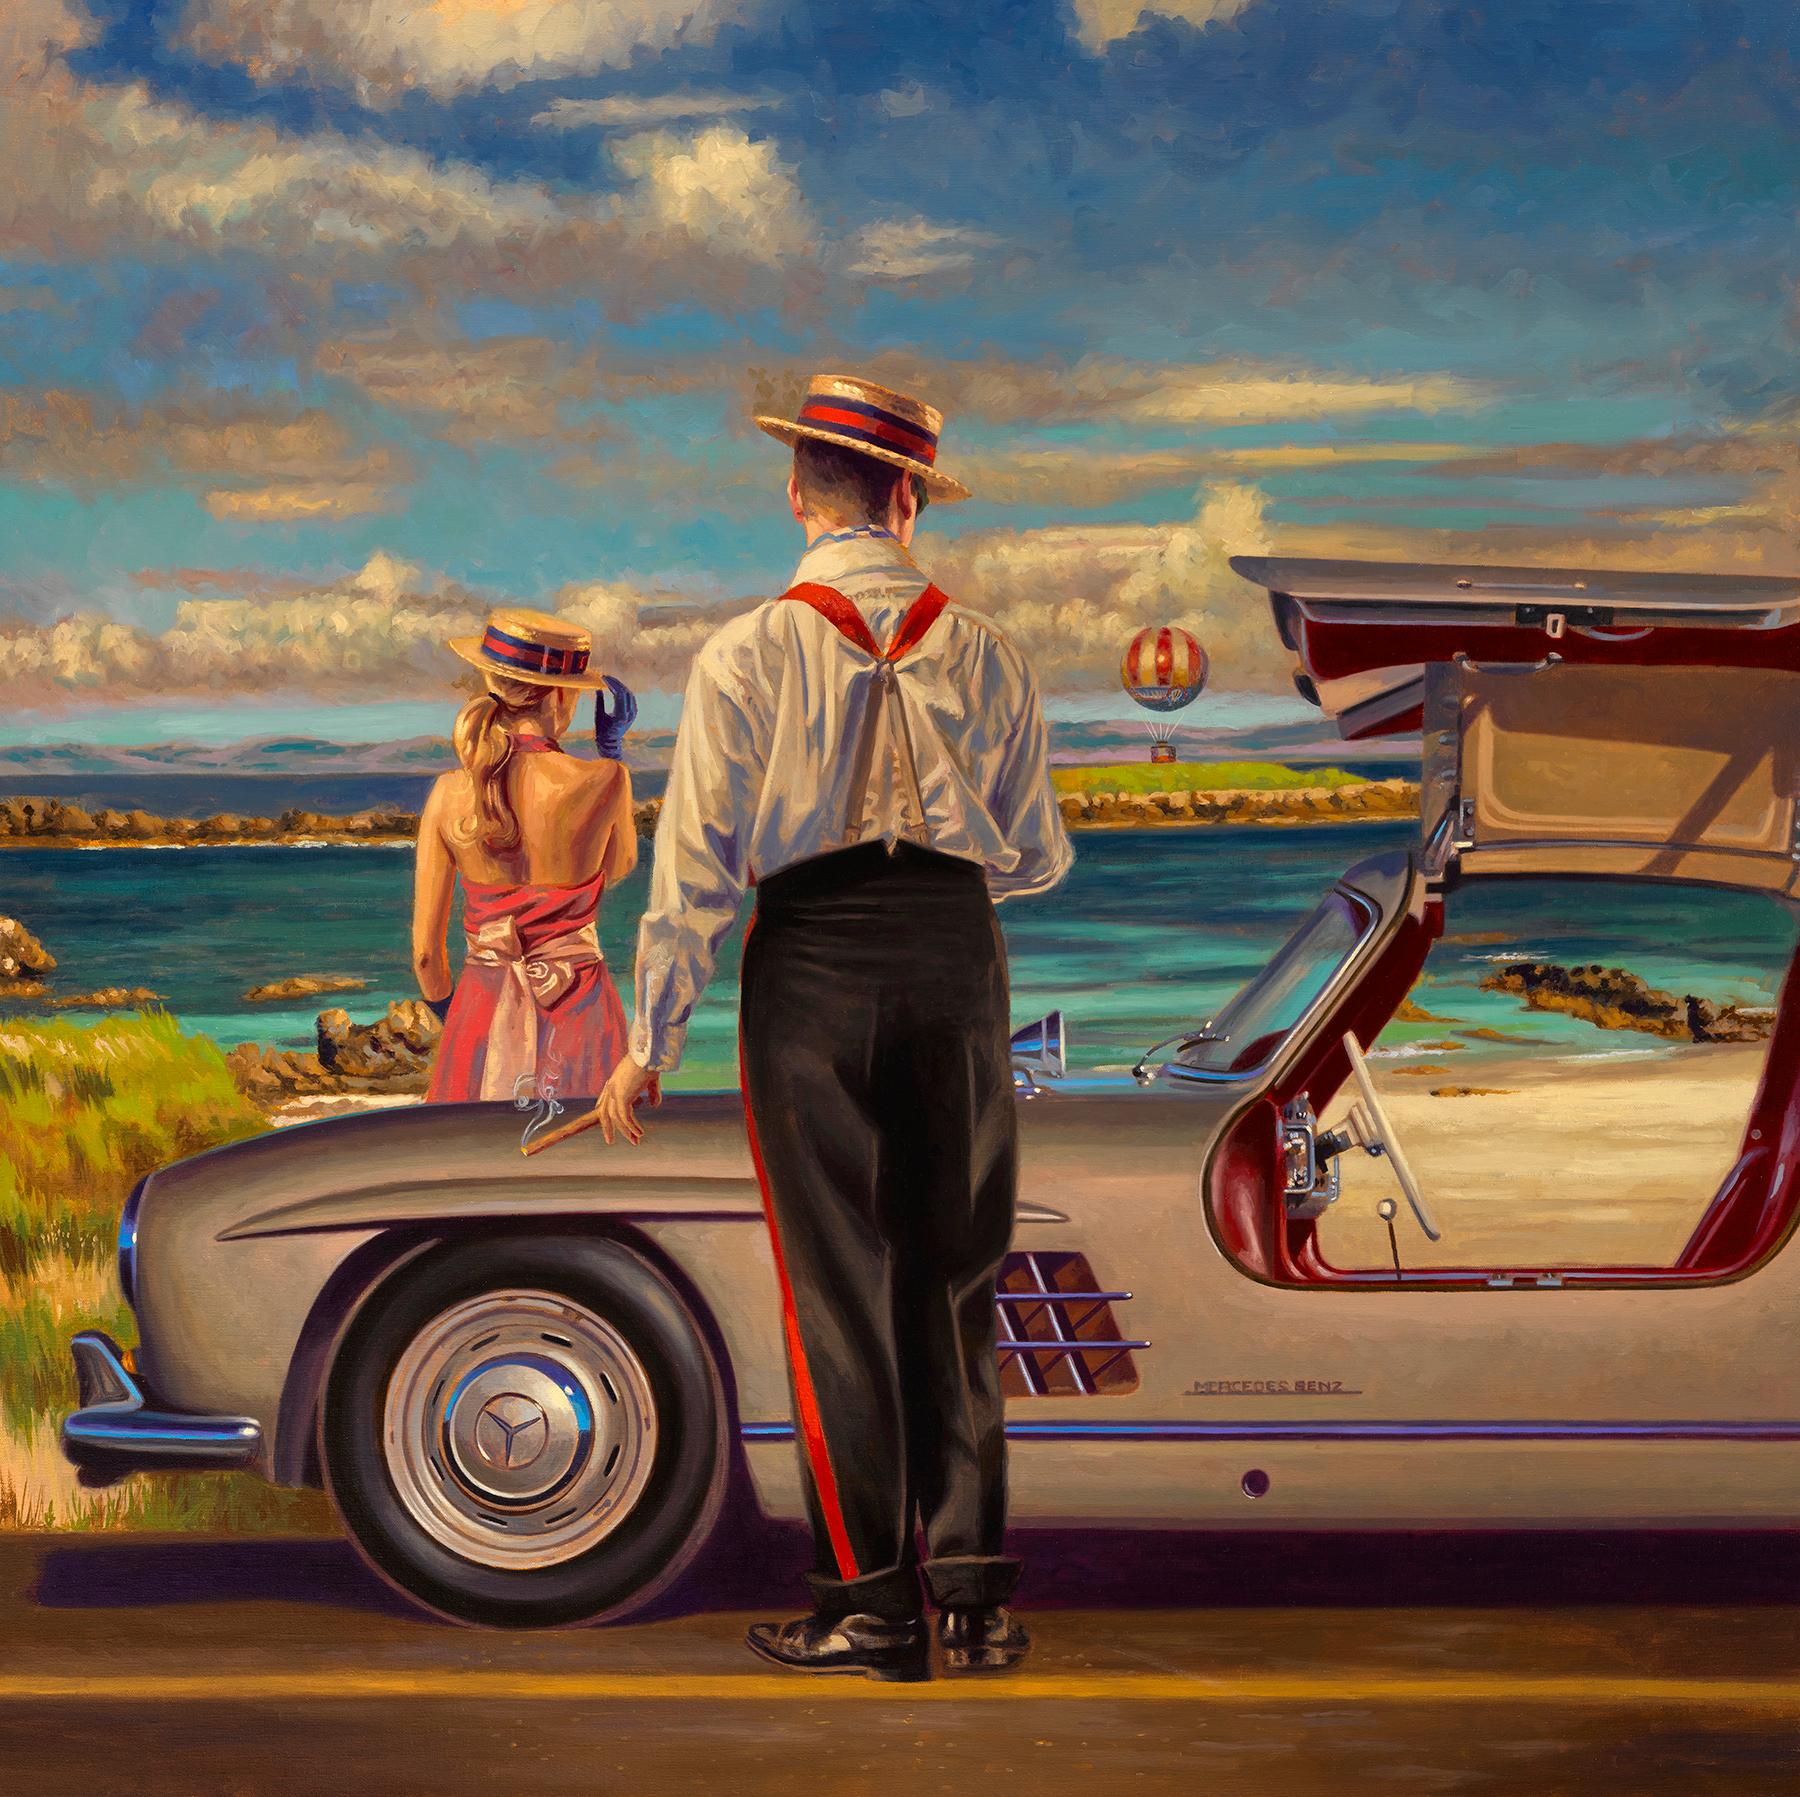 "Lift-Off!" Take a luxurious ride beside this aquamarine sea  - Painting by Peregrine Heathcote